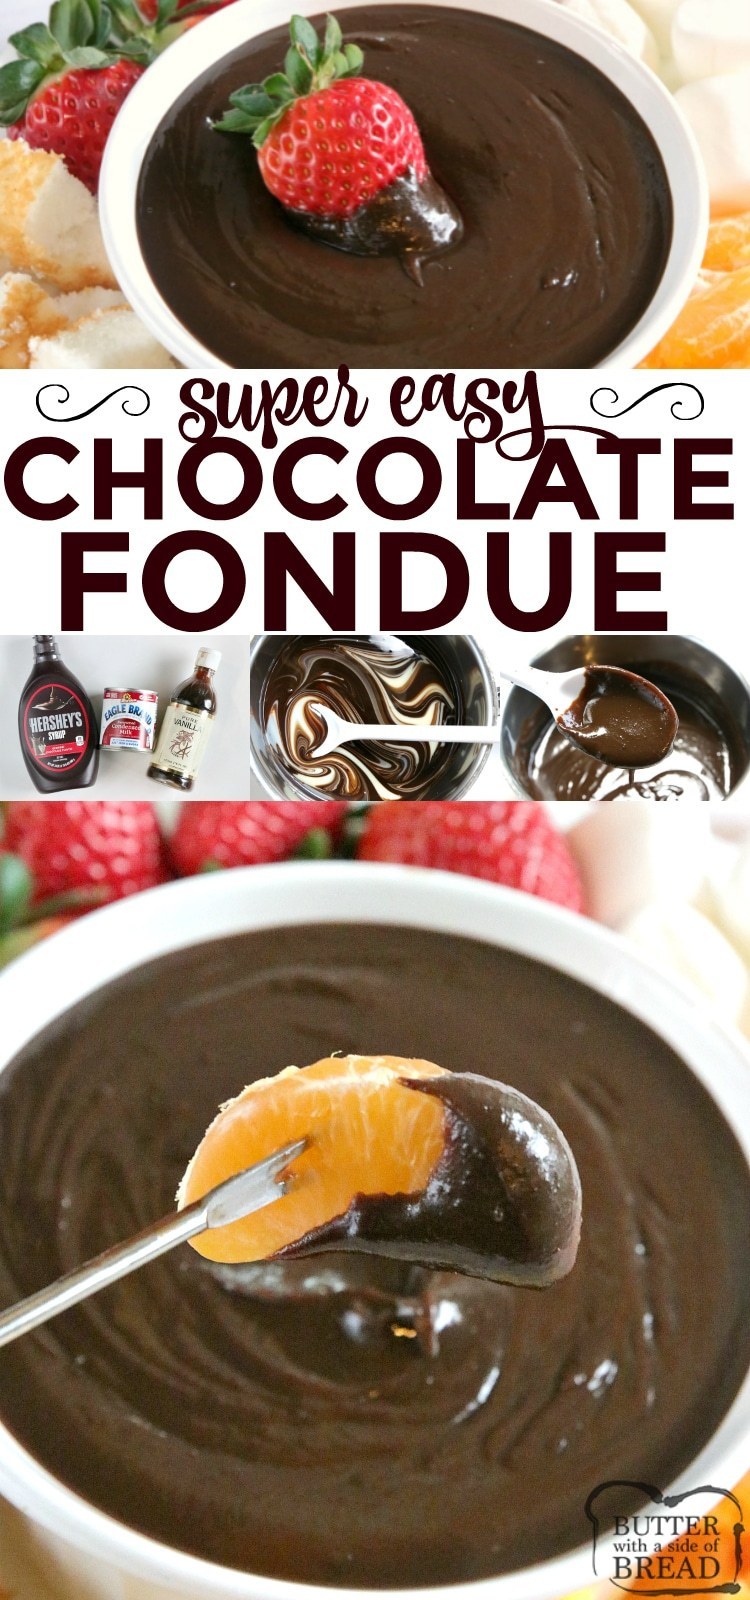 Easy Chocolate Fondue is made on the stove with only 3 ingredients and is the most delicious dessert for all occasions! This easy chocolate fondue recipe is perfect for dipping all of your favorite fruits and dippers.